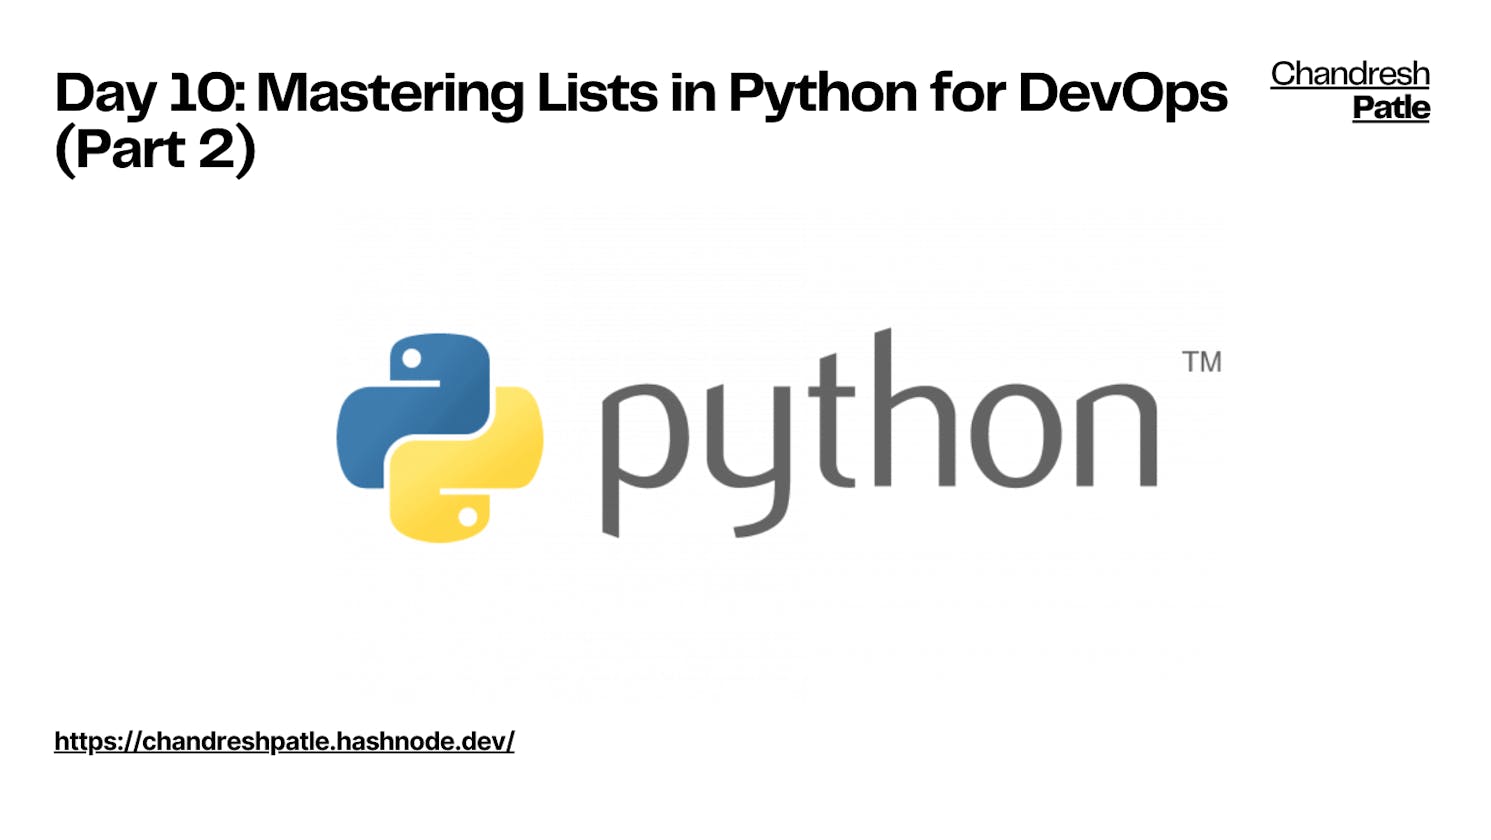 Day 10: Mastering Lists in Python for DevOps (Part 2)